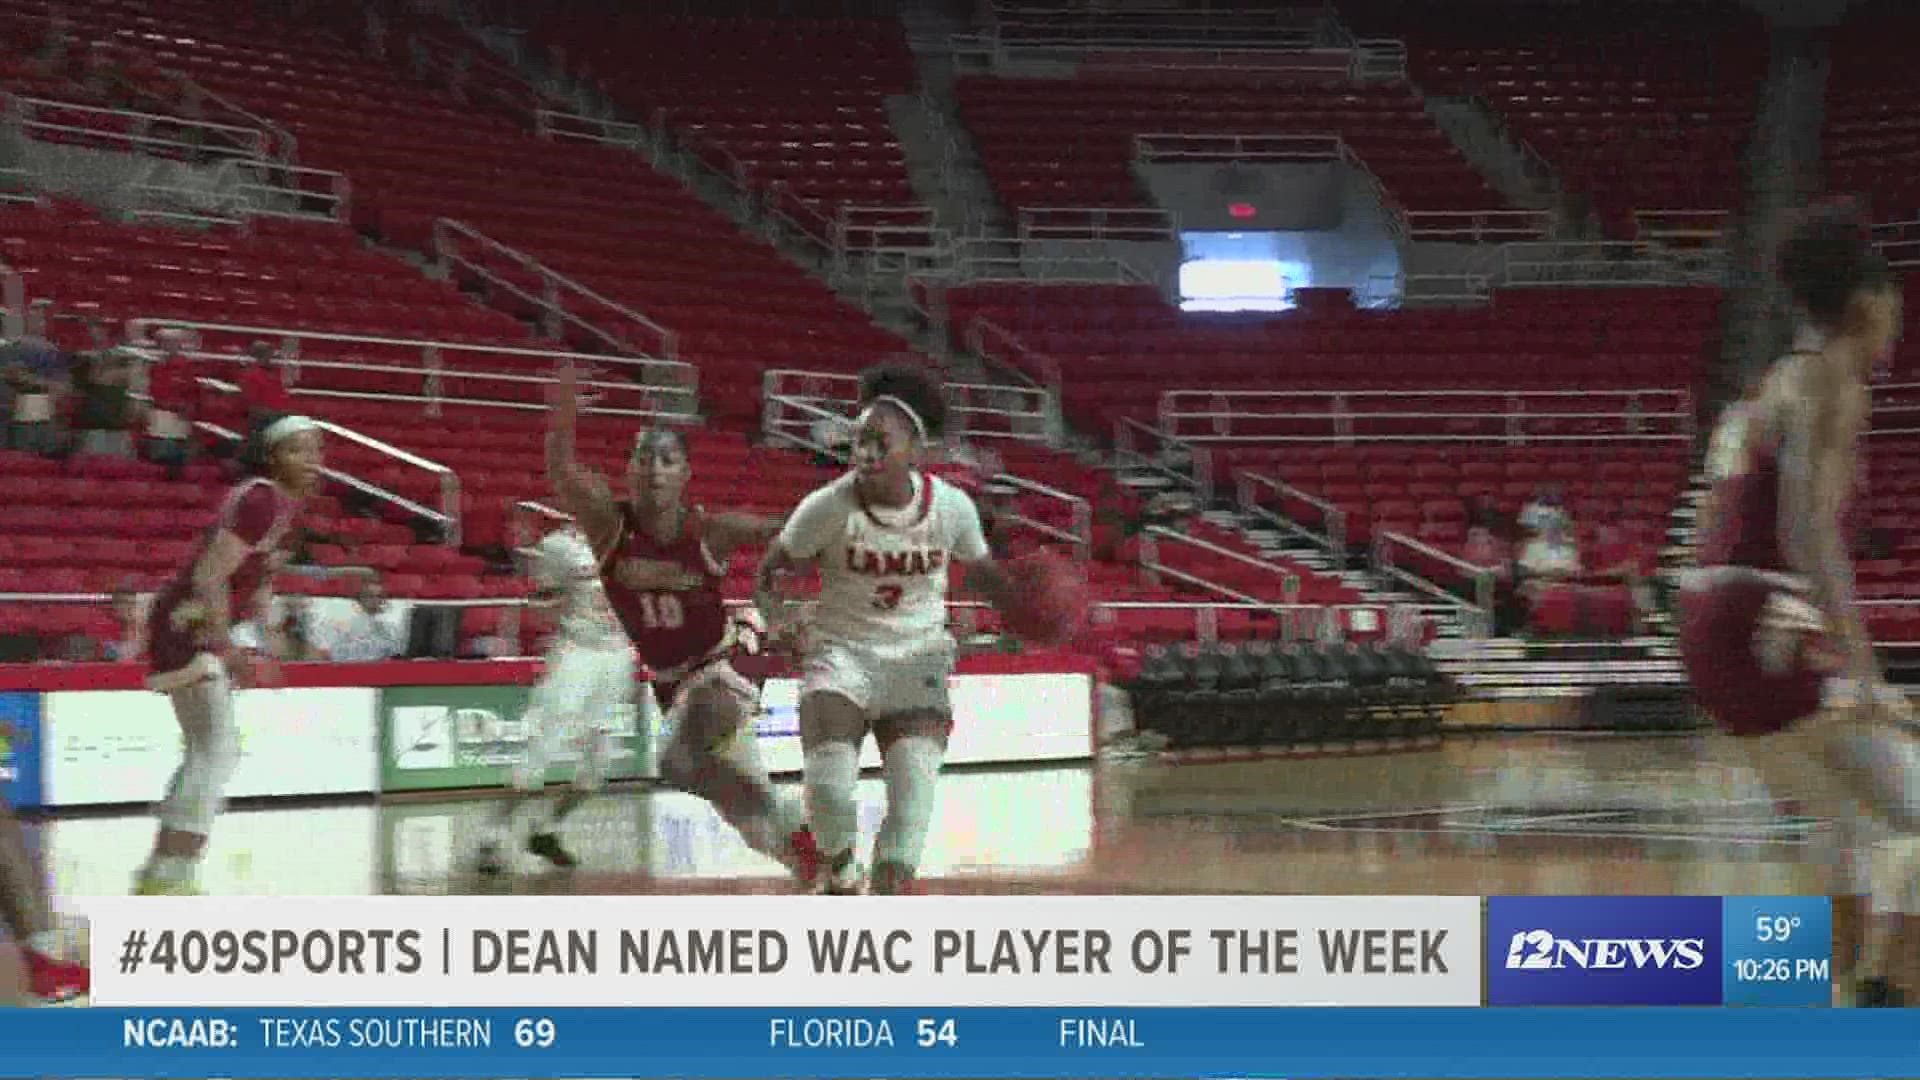 Dean named WAC Player of The Week after scoring 25 points against Loyola-New Orleans